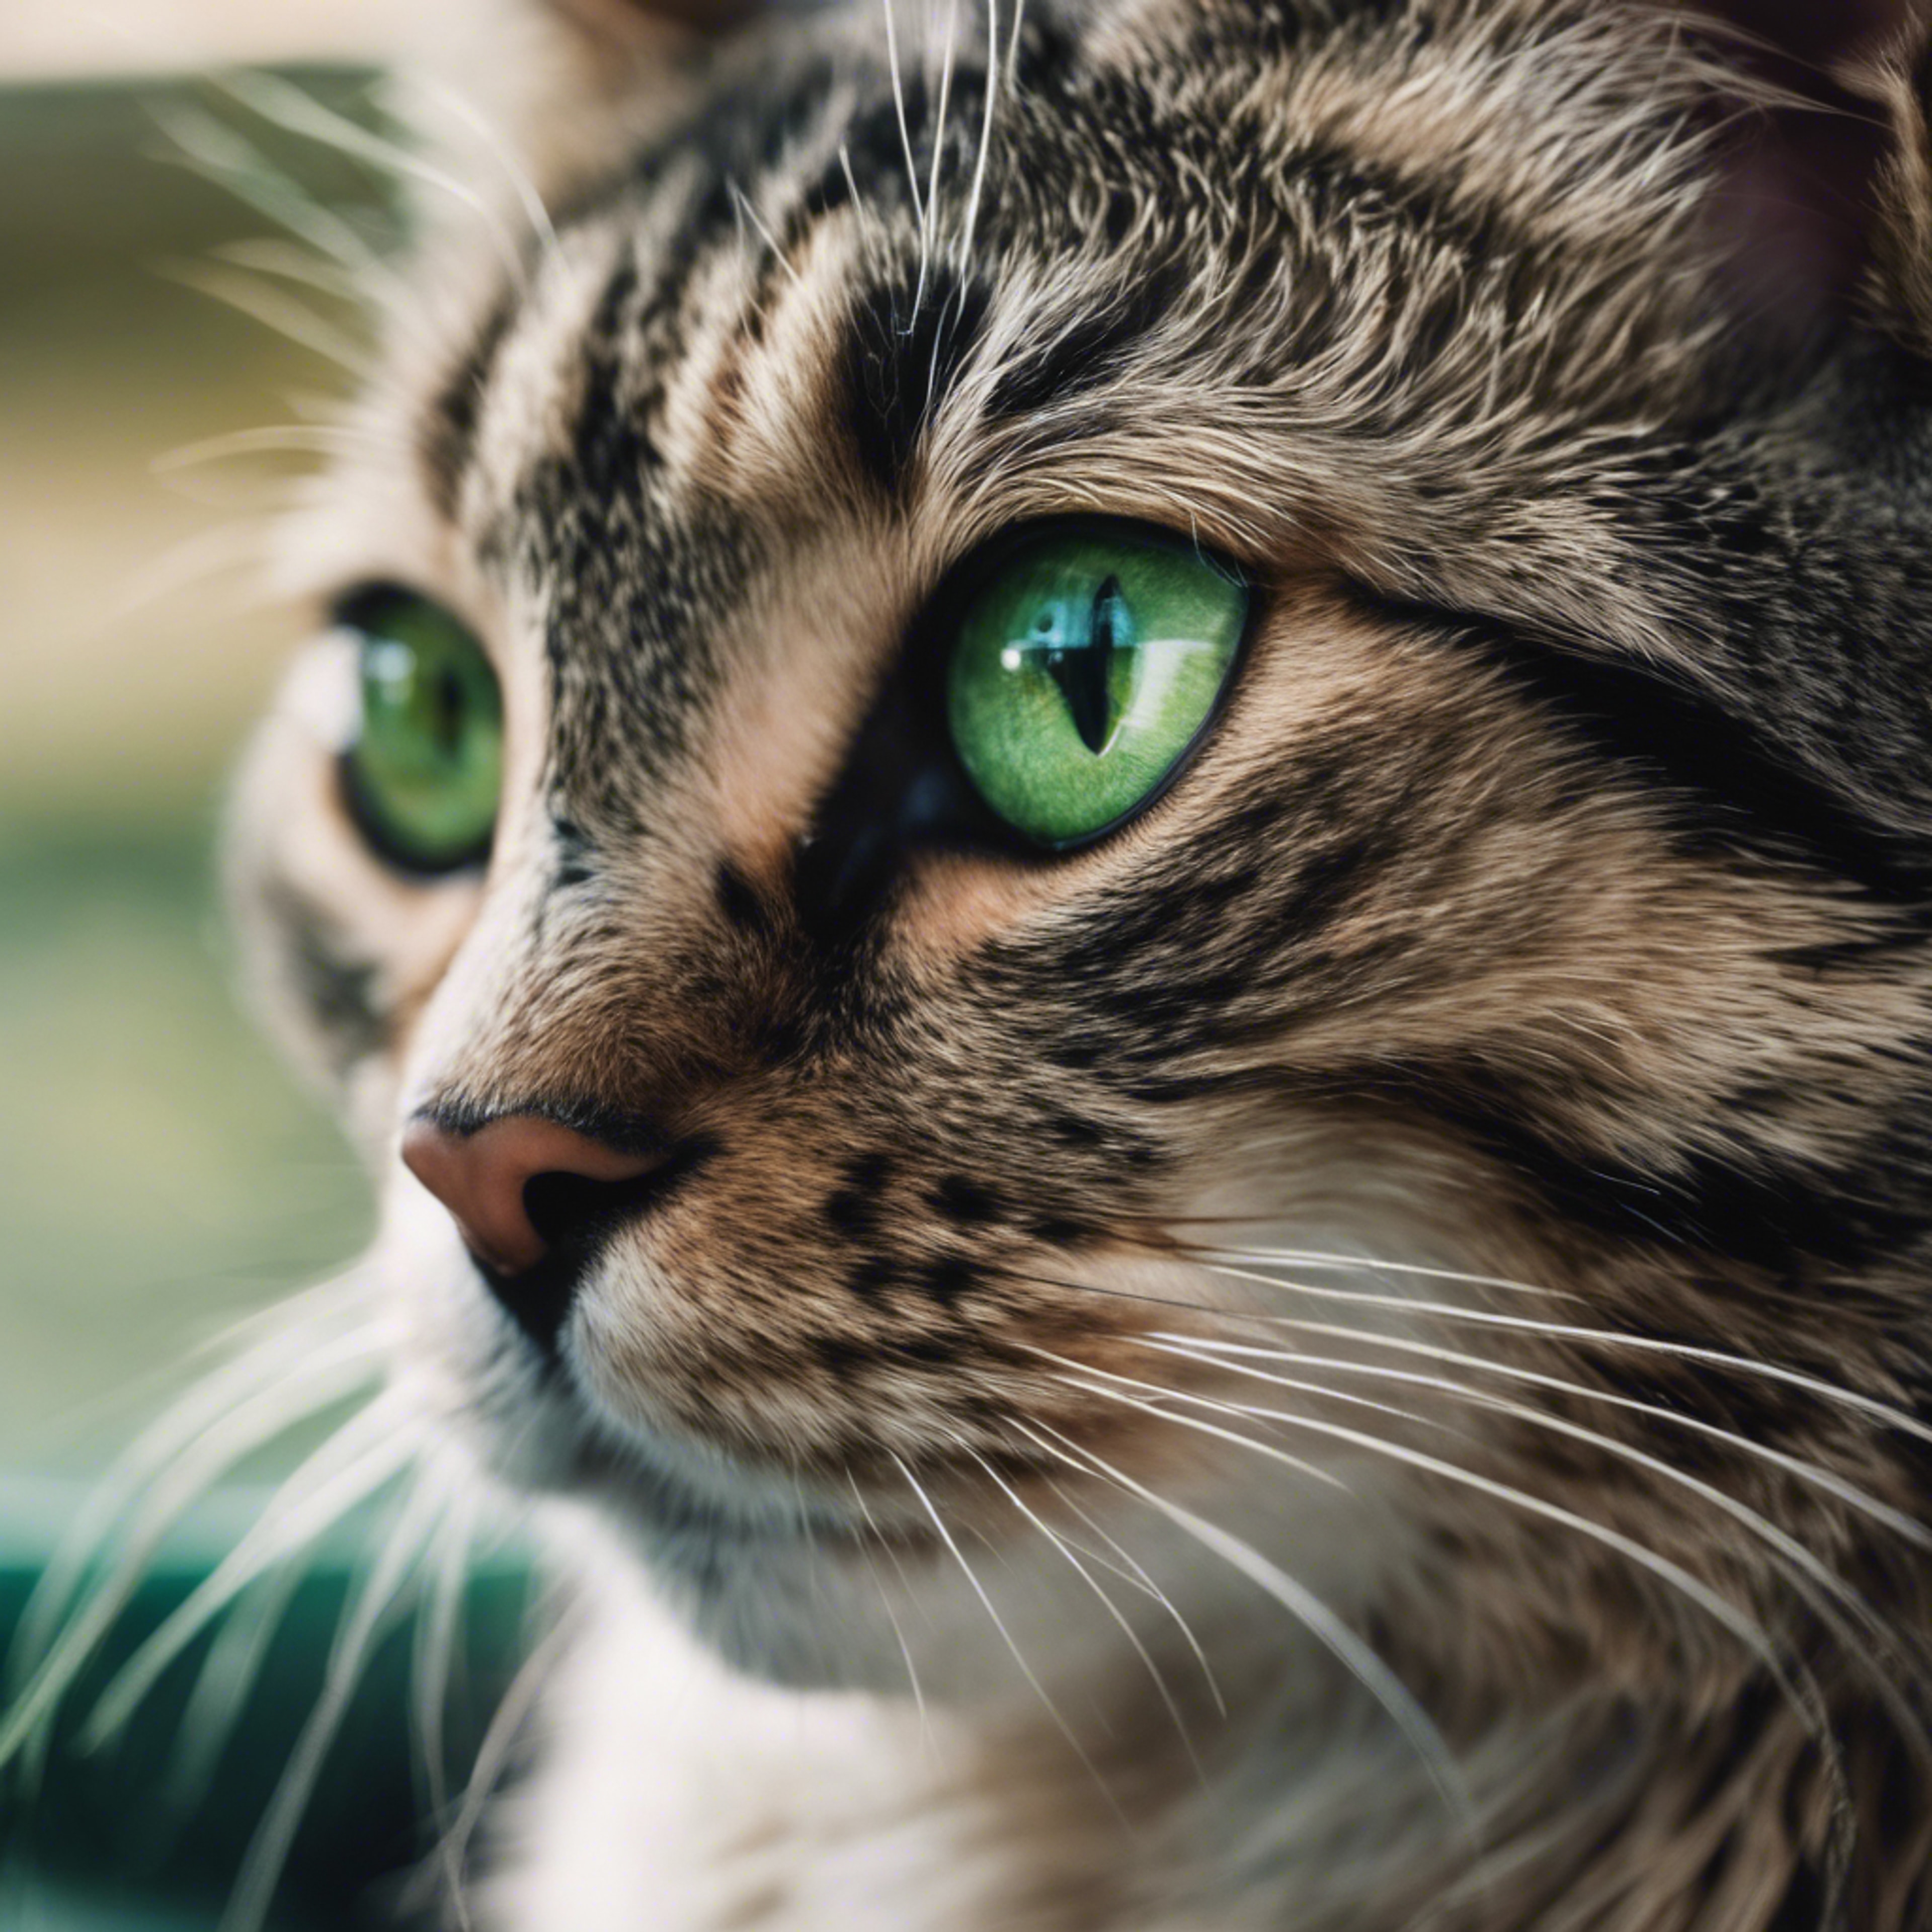 A cat with unusual dark green eyes looking intently at something. Wallpaper[b079ccec3fc6439bb0c0]